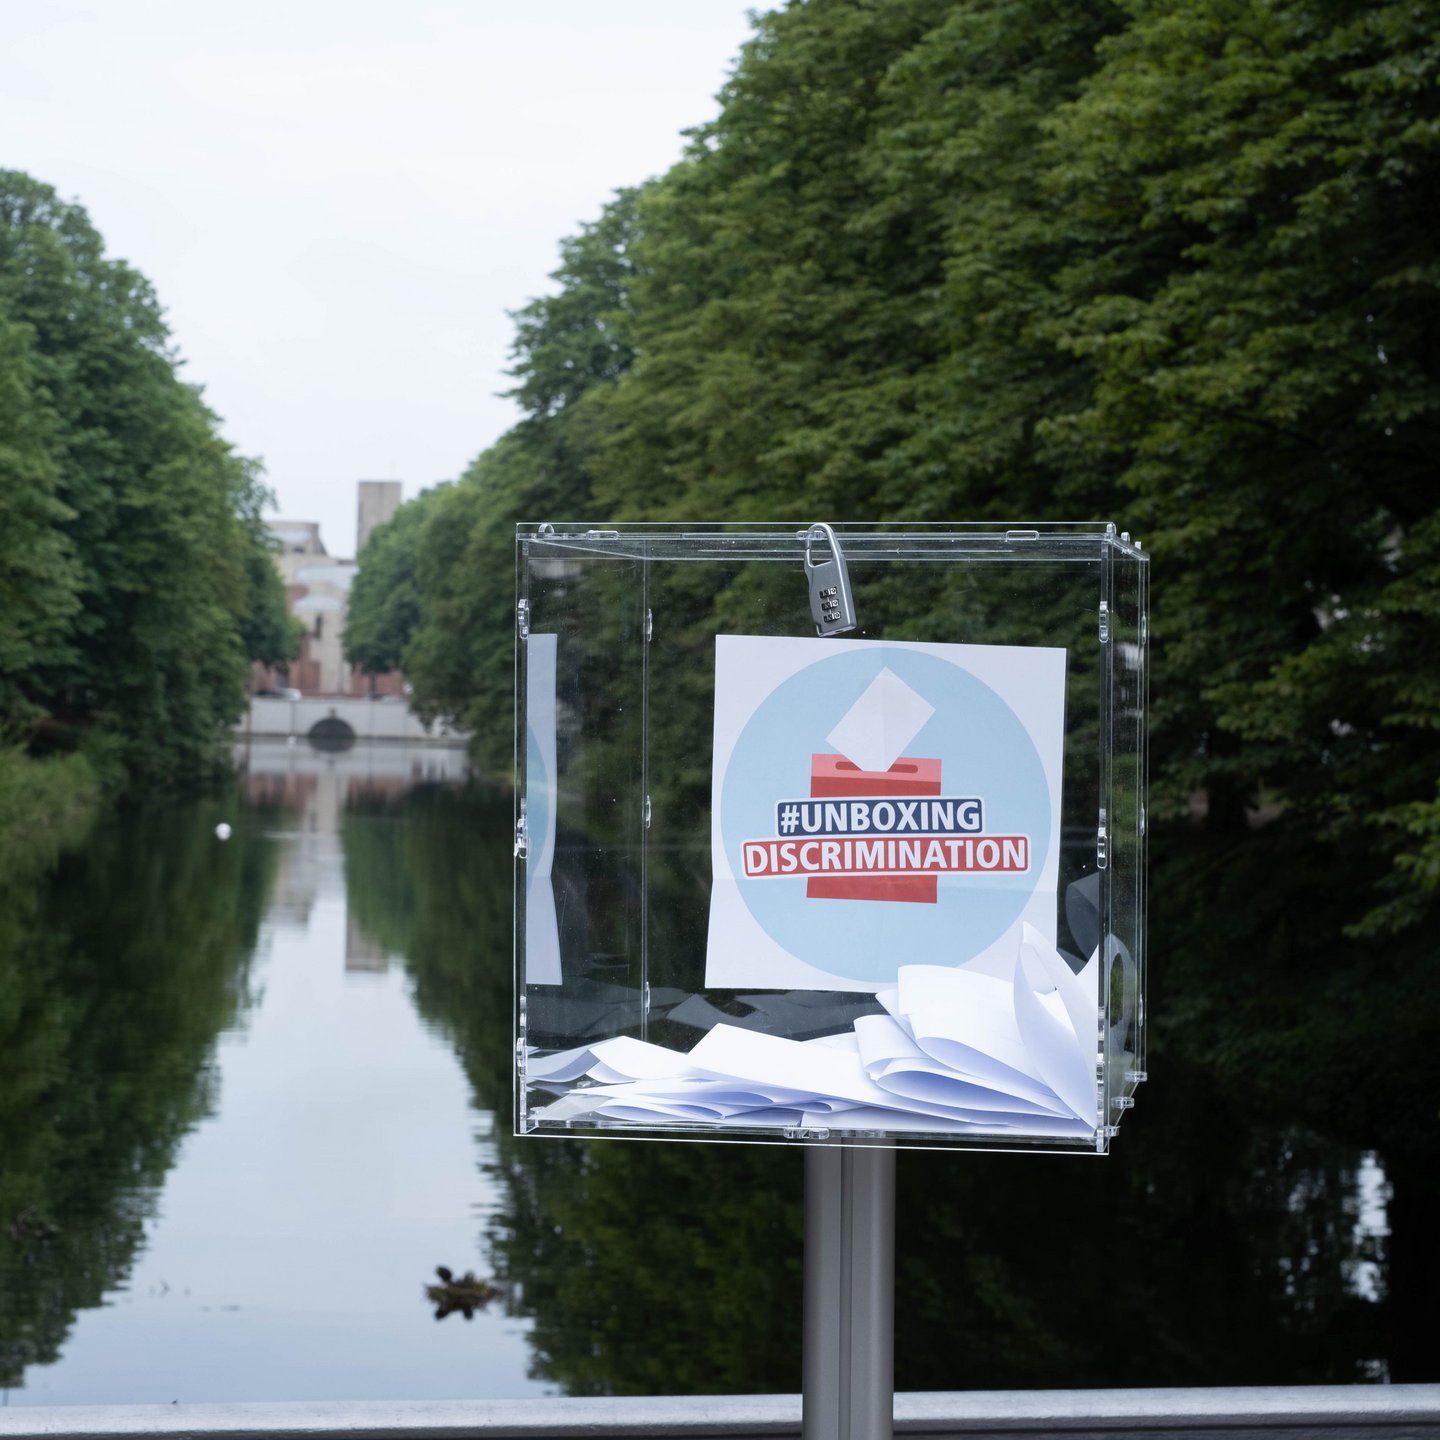 A transparent plexiglass box on a stand stands on the Clarenbachkanal at the Faculty of Human Sciences at Cologne University. Inside the box is the logo of the campaign #unboxingdiscrimination. There are also some white slips of paper collected in the box.